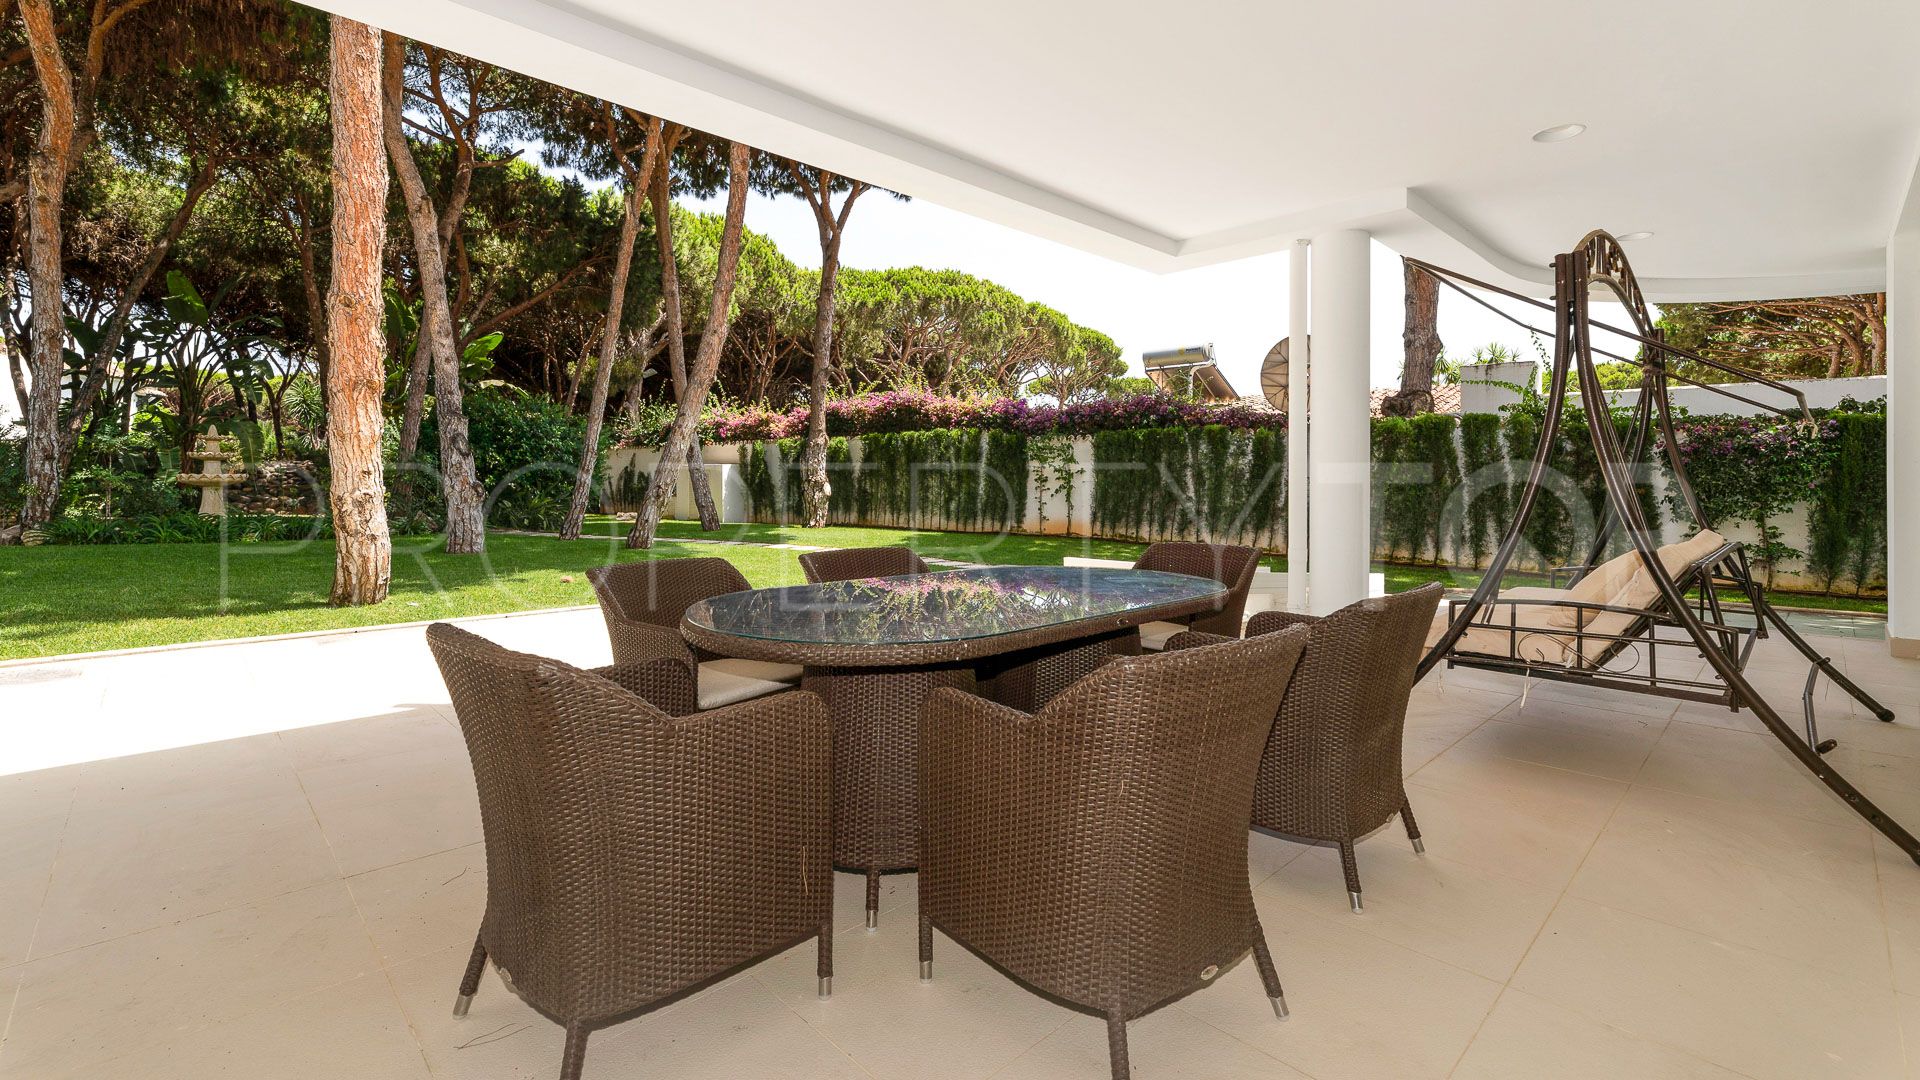 6 bedrooms villa in Cabopino for sale